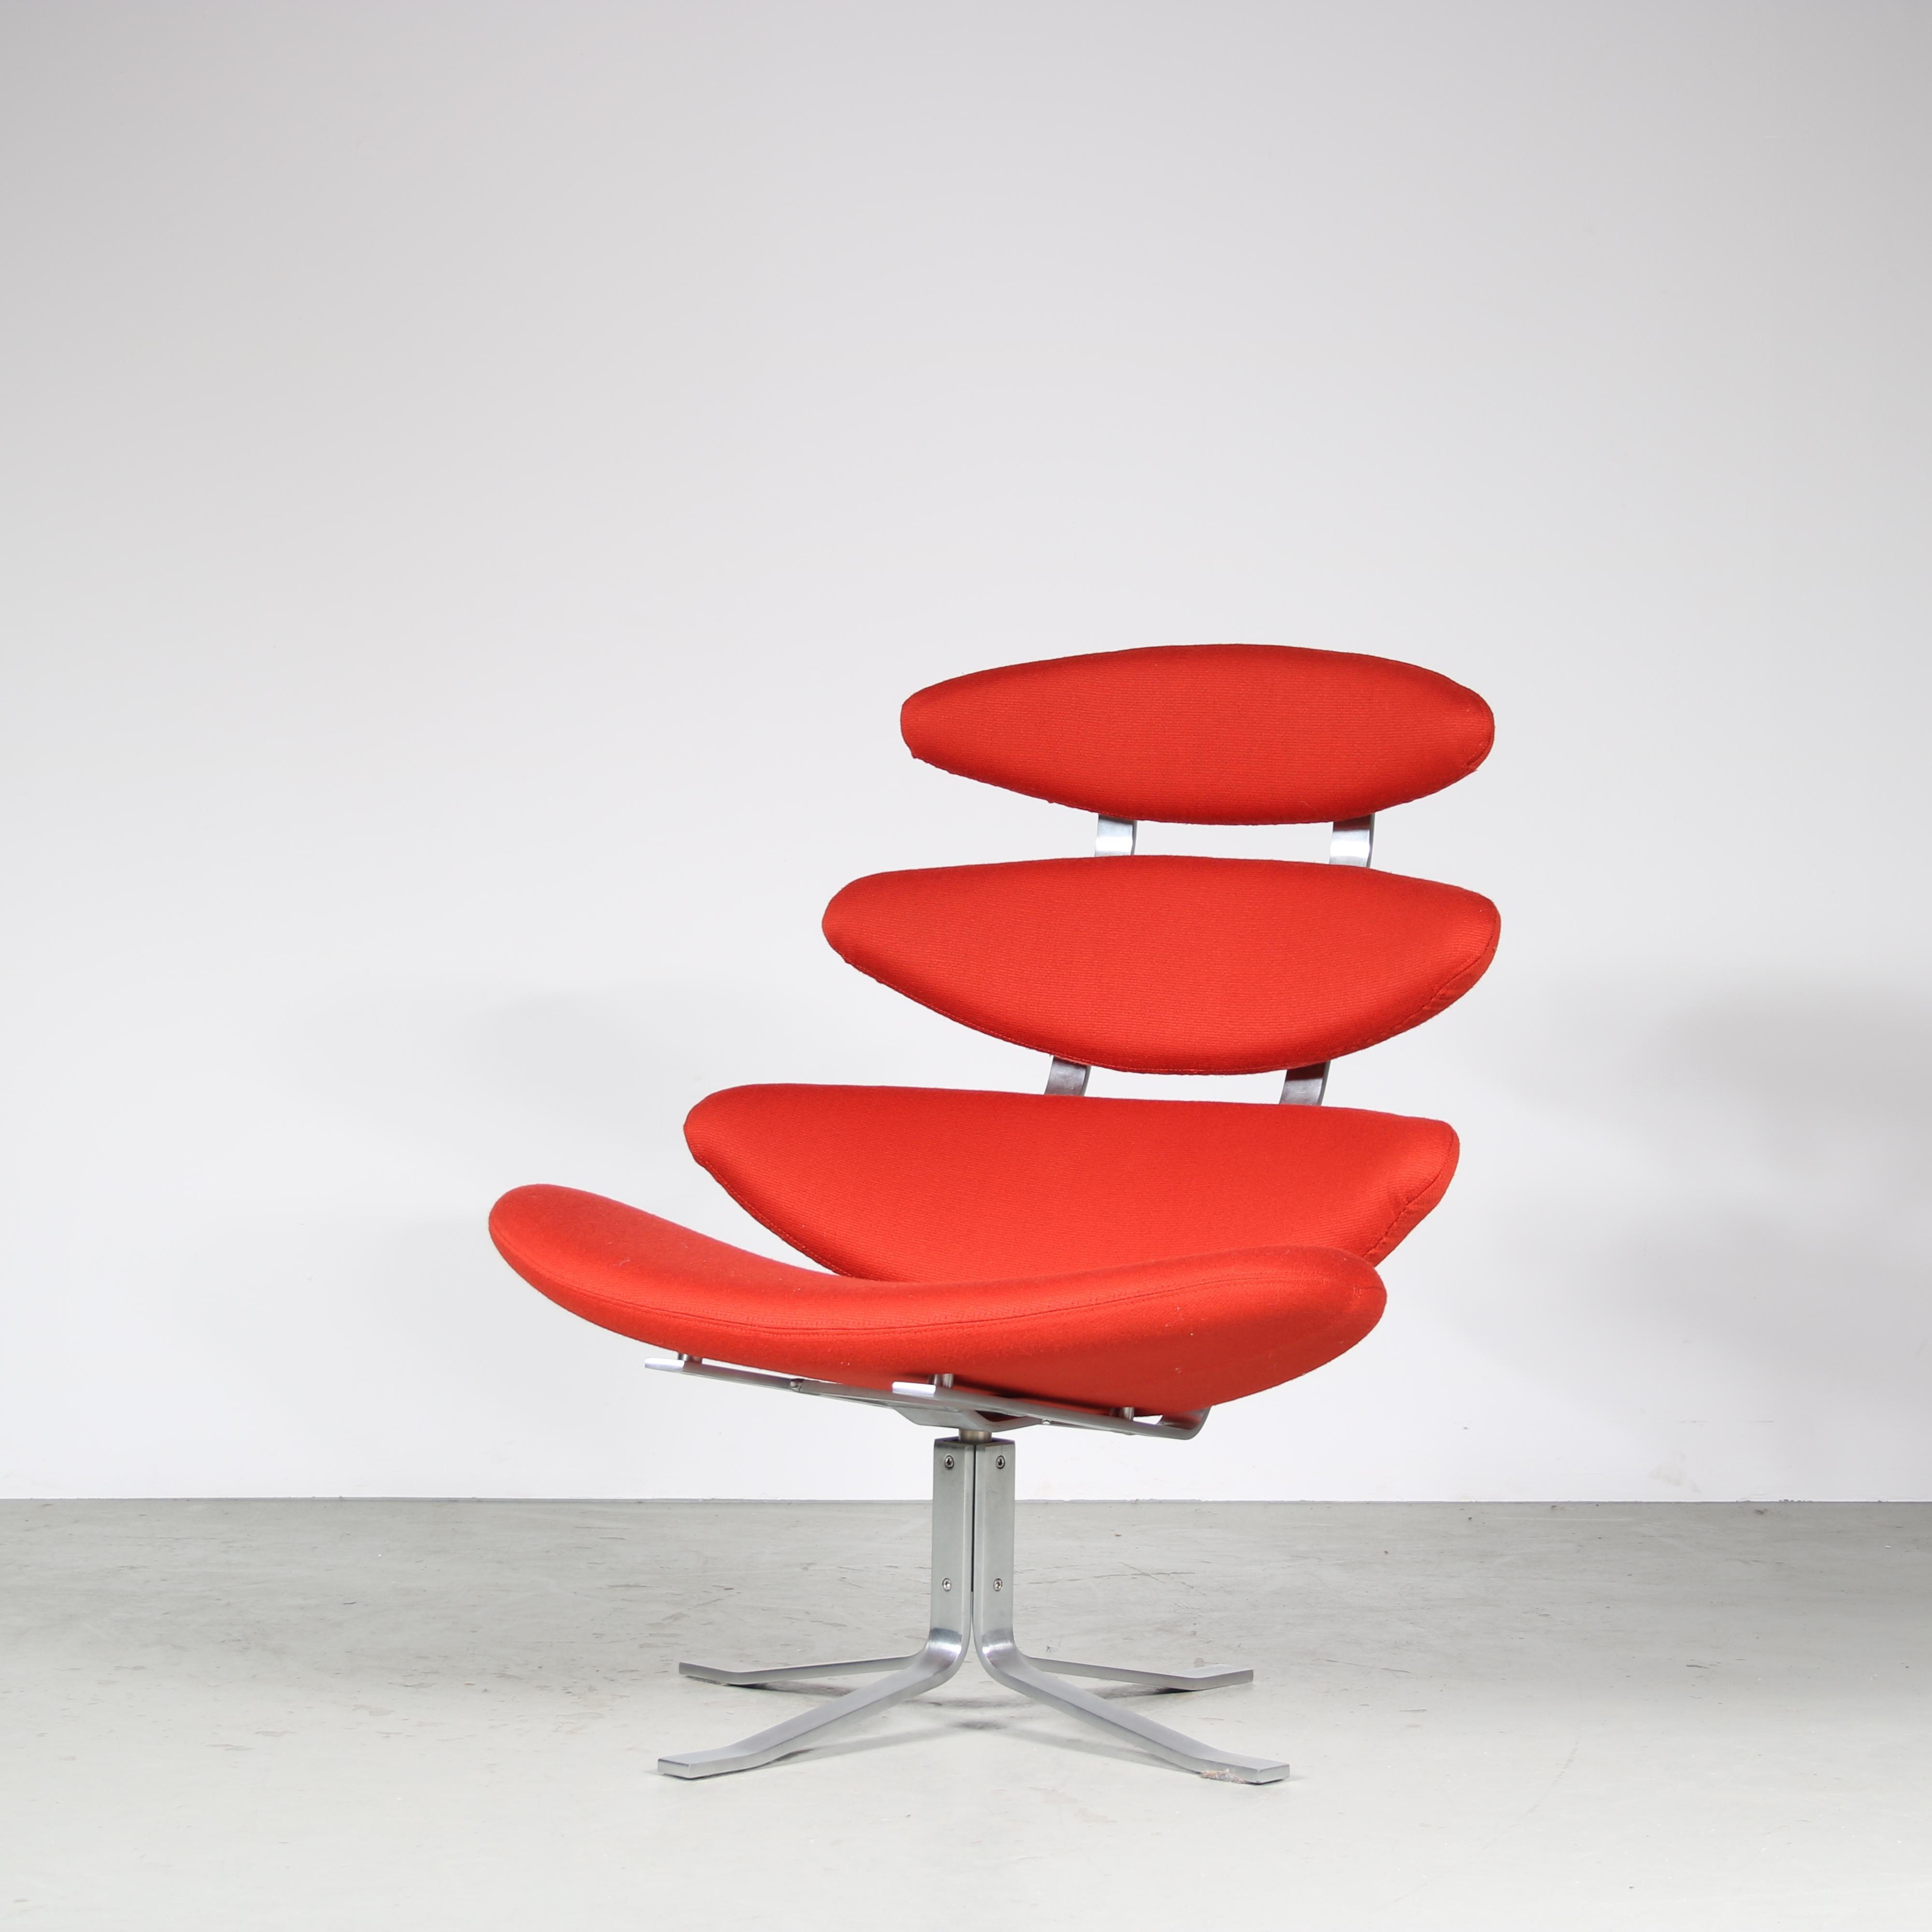 A unique chair, model “Corona”, designed by Poul Volther and manufactured by Erik Jorgensen in Denmark in 1964.

This iconic chair is made of beautiful quality chrome plated metal and newly upholstered in high quality red fabric. It’s elliptical